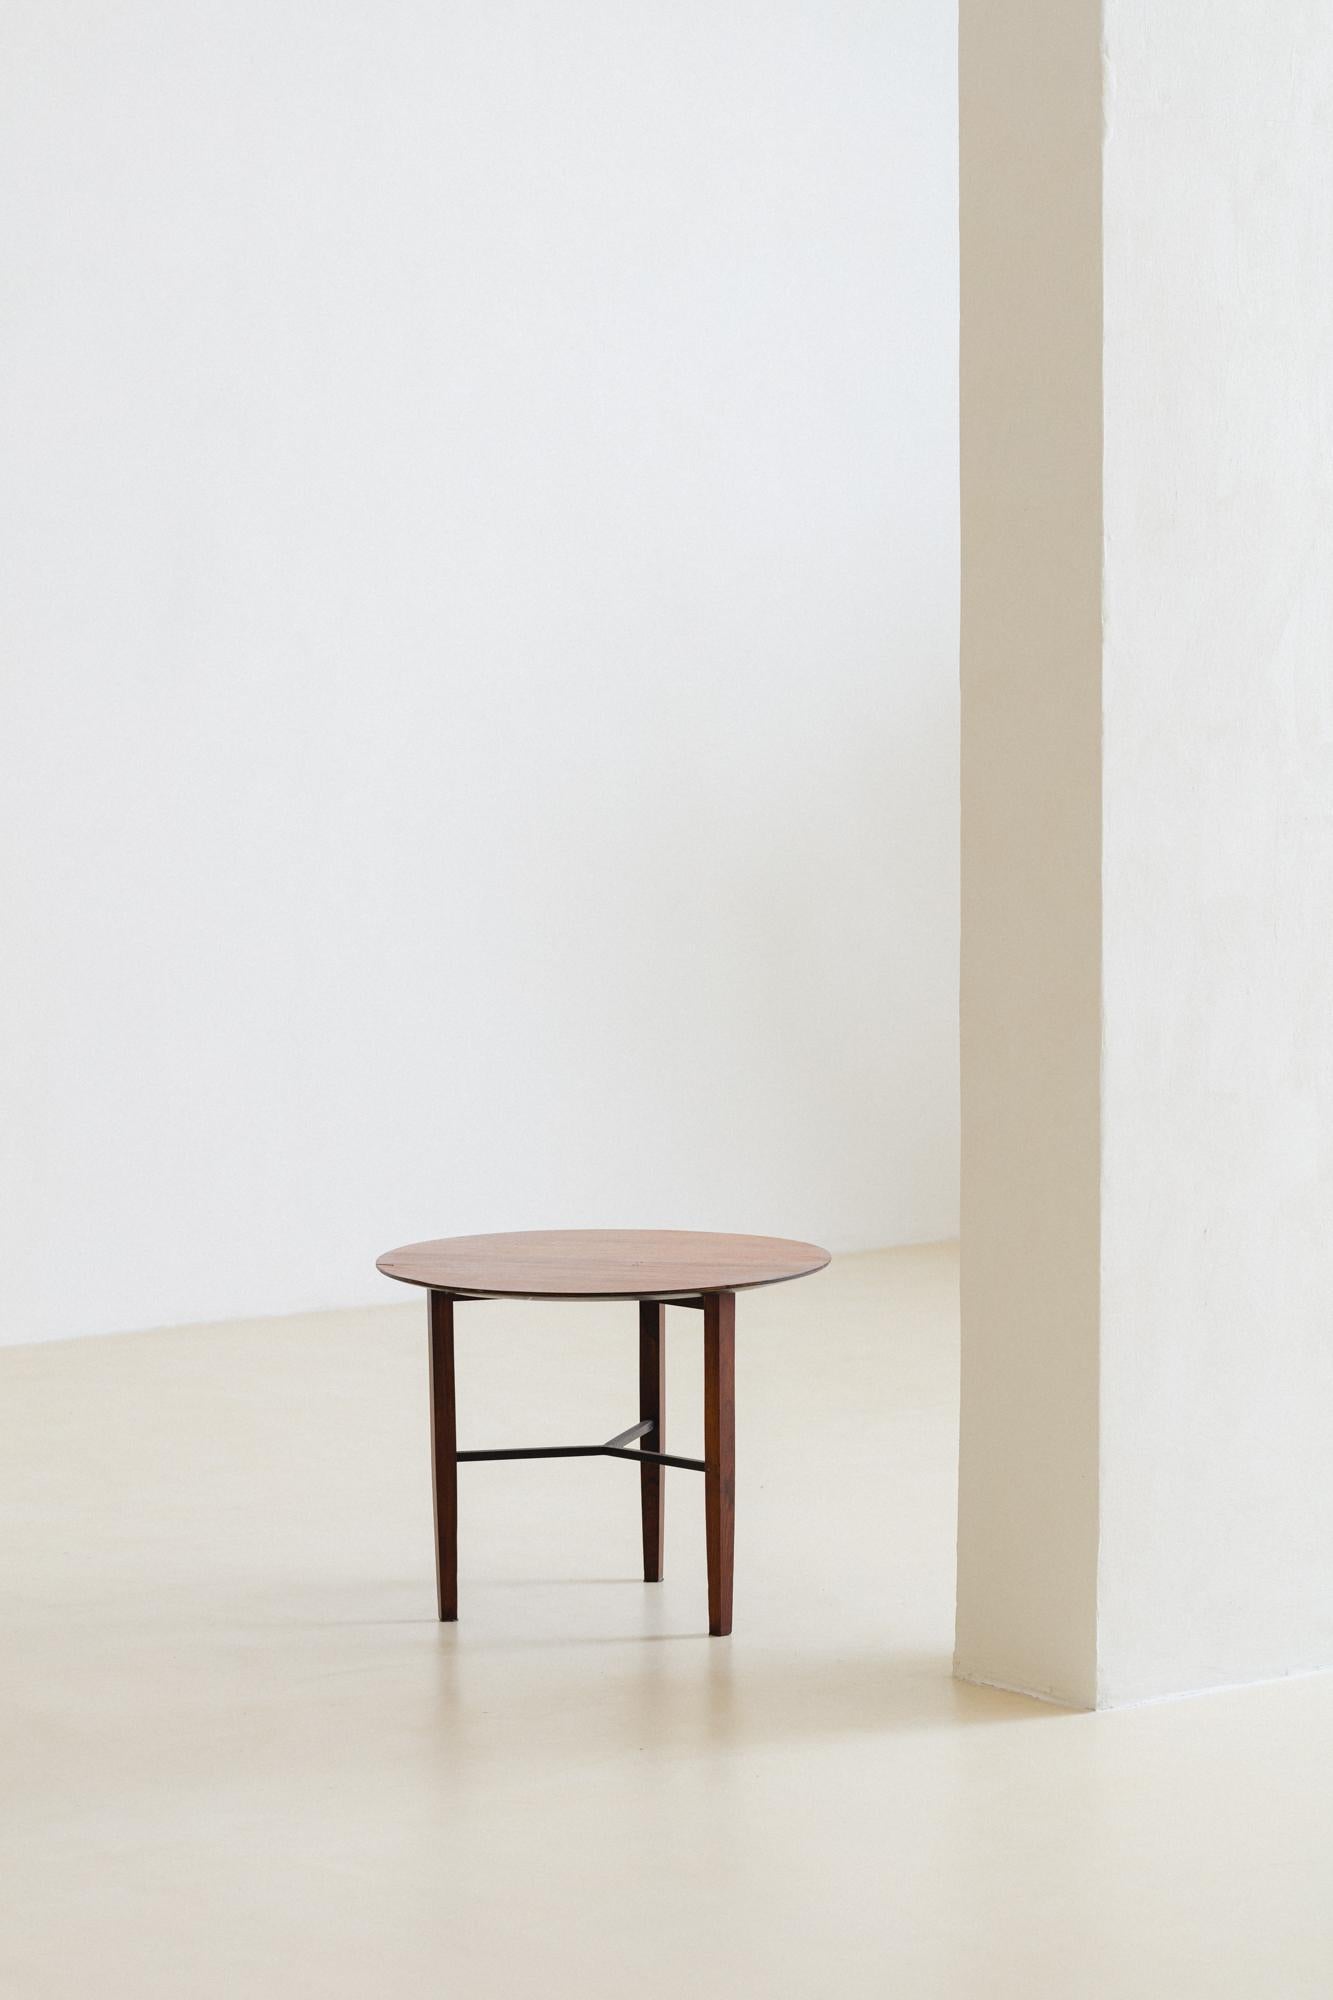 The wood pieces produced by Forma S.A. Móveis e Objetos de Arte during the 1950s and 1960s in Brazil are incredibly well-designed and executed. This round side table made of Caviuna is a beautiful combination of simplistic design and excellent